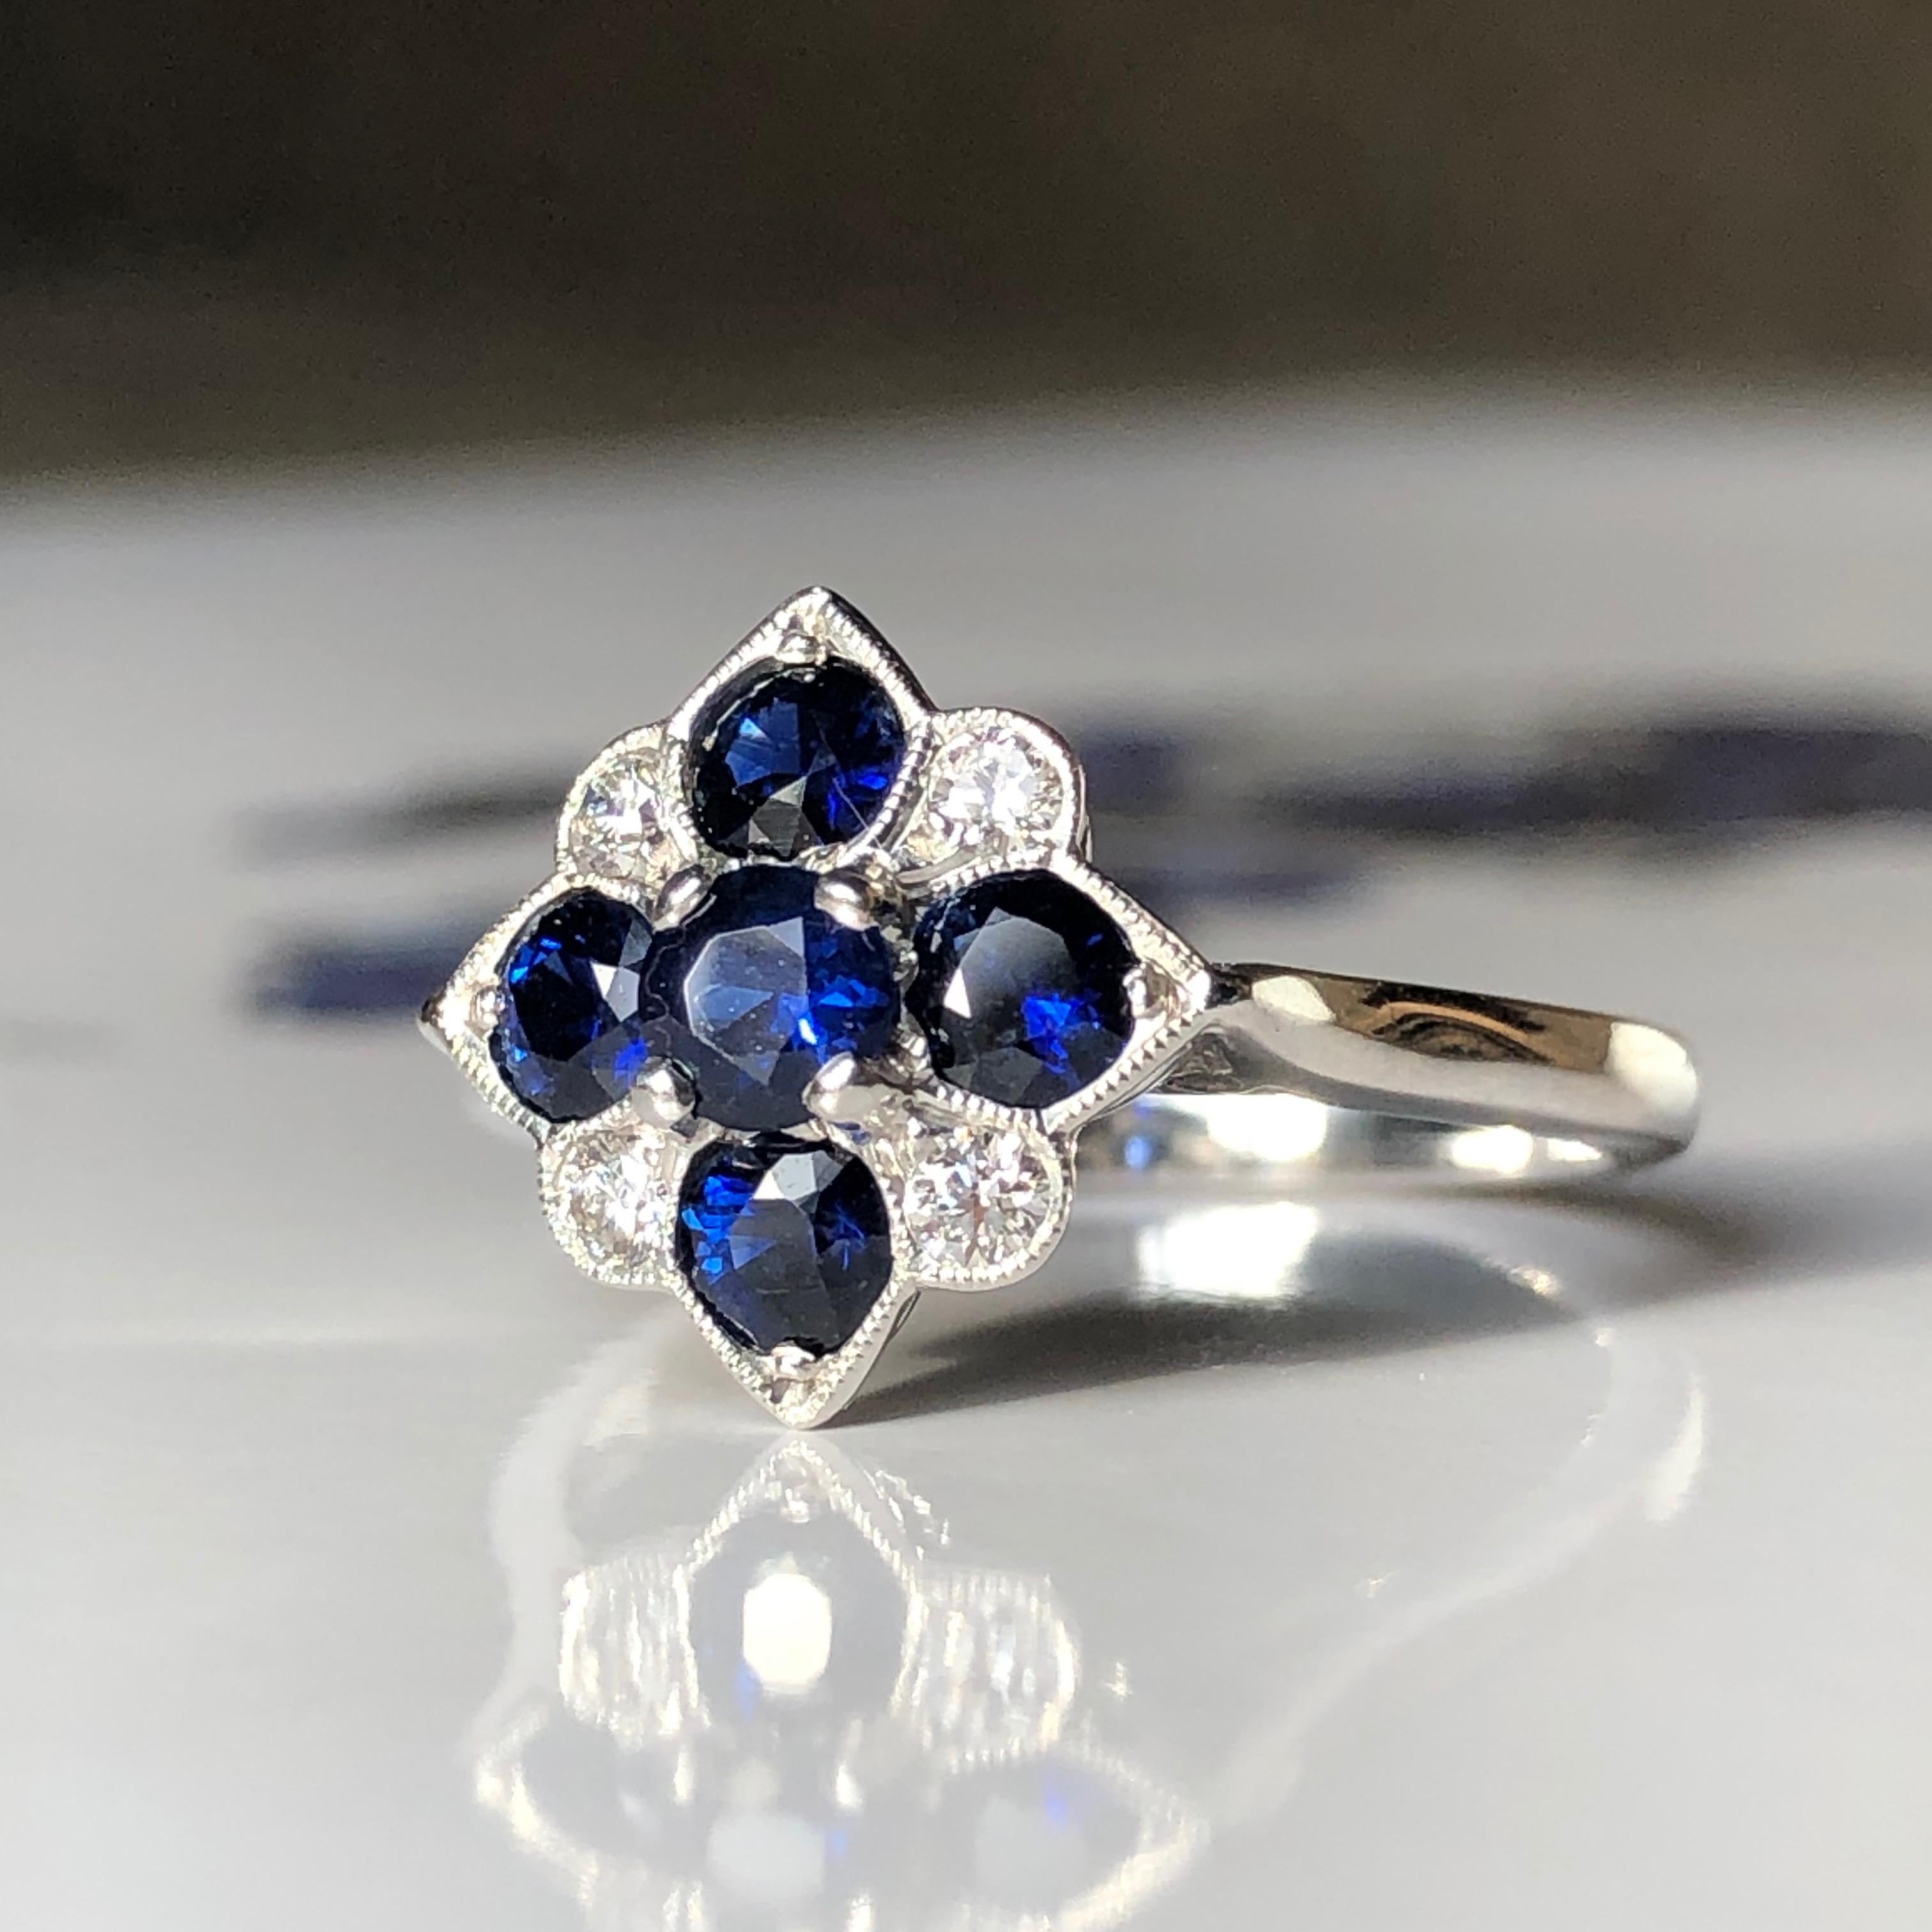 An Elegant Sapphire and Diamond Ring Art Deco Style Ring 

Set With 5 Deep Rich Blue Sapphires and four round brilliant cut diamonds

Excellent craftsmanship 

This ring is also available in Ruby and Diamond please see our shop 

Sapphire, chosen by